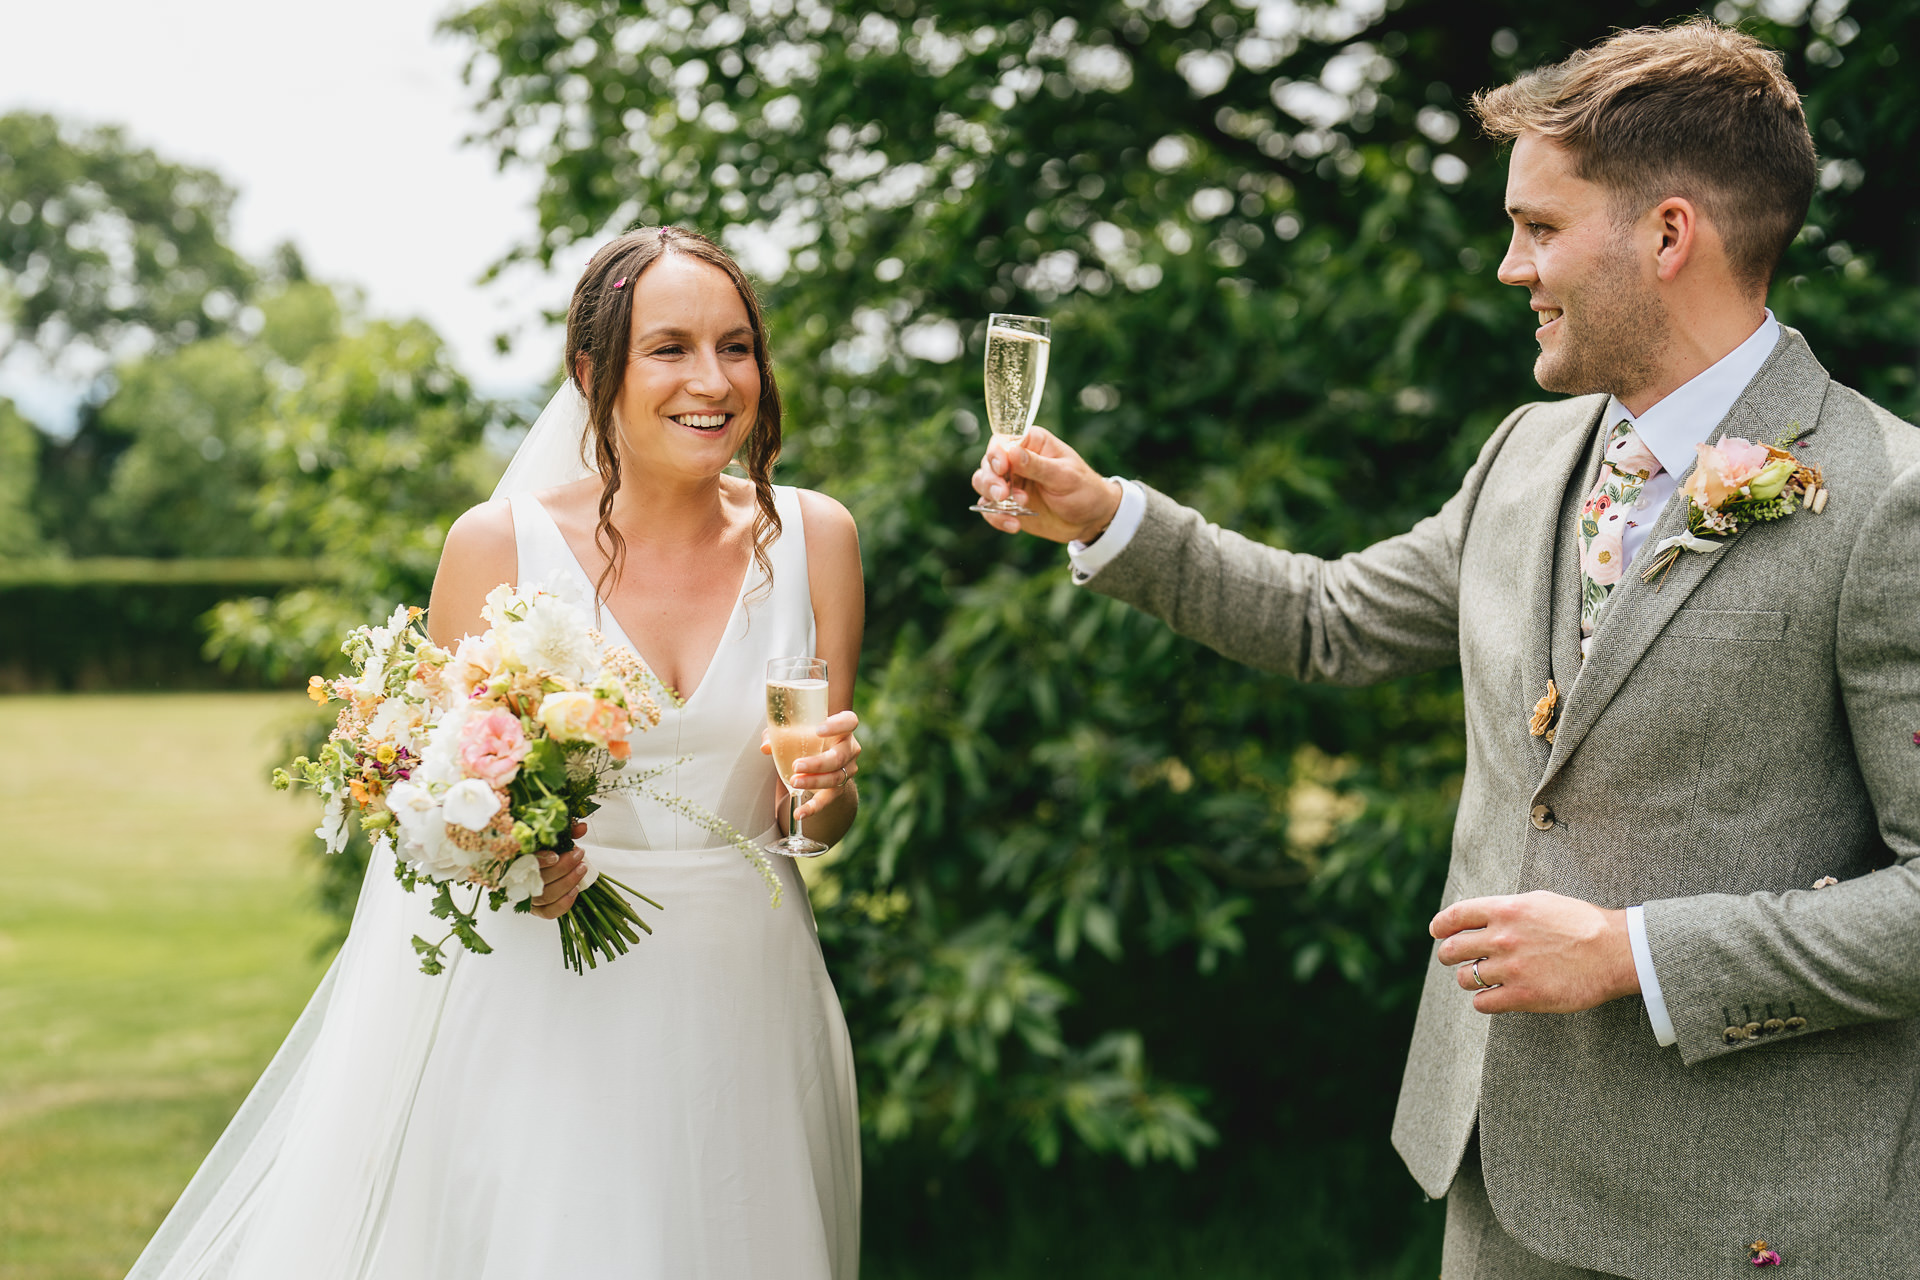 A bride and groom raising glasses to each other in a garden setting